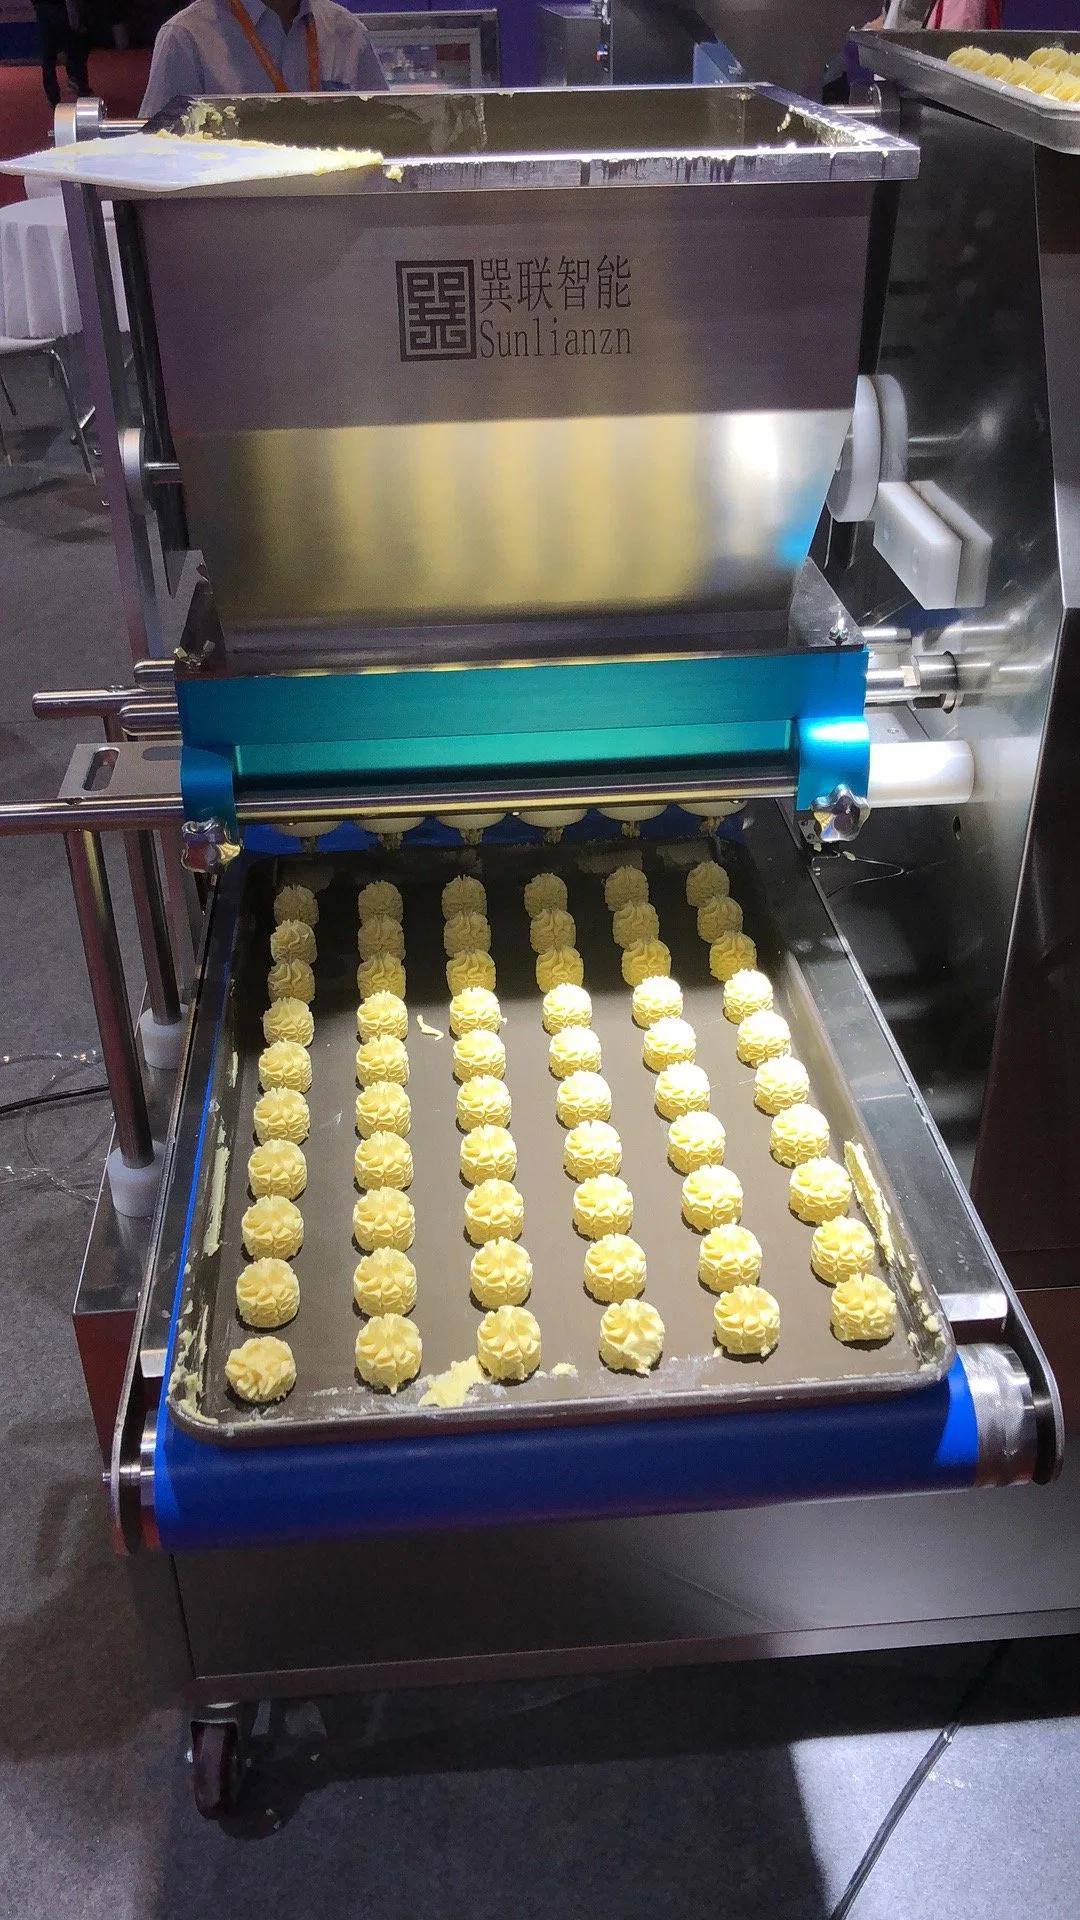 Small Rotary Multidrop Depositors Commercial Wire Cut Cookies Maker Machine